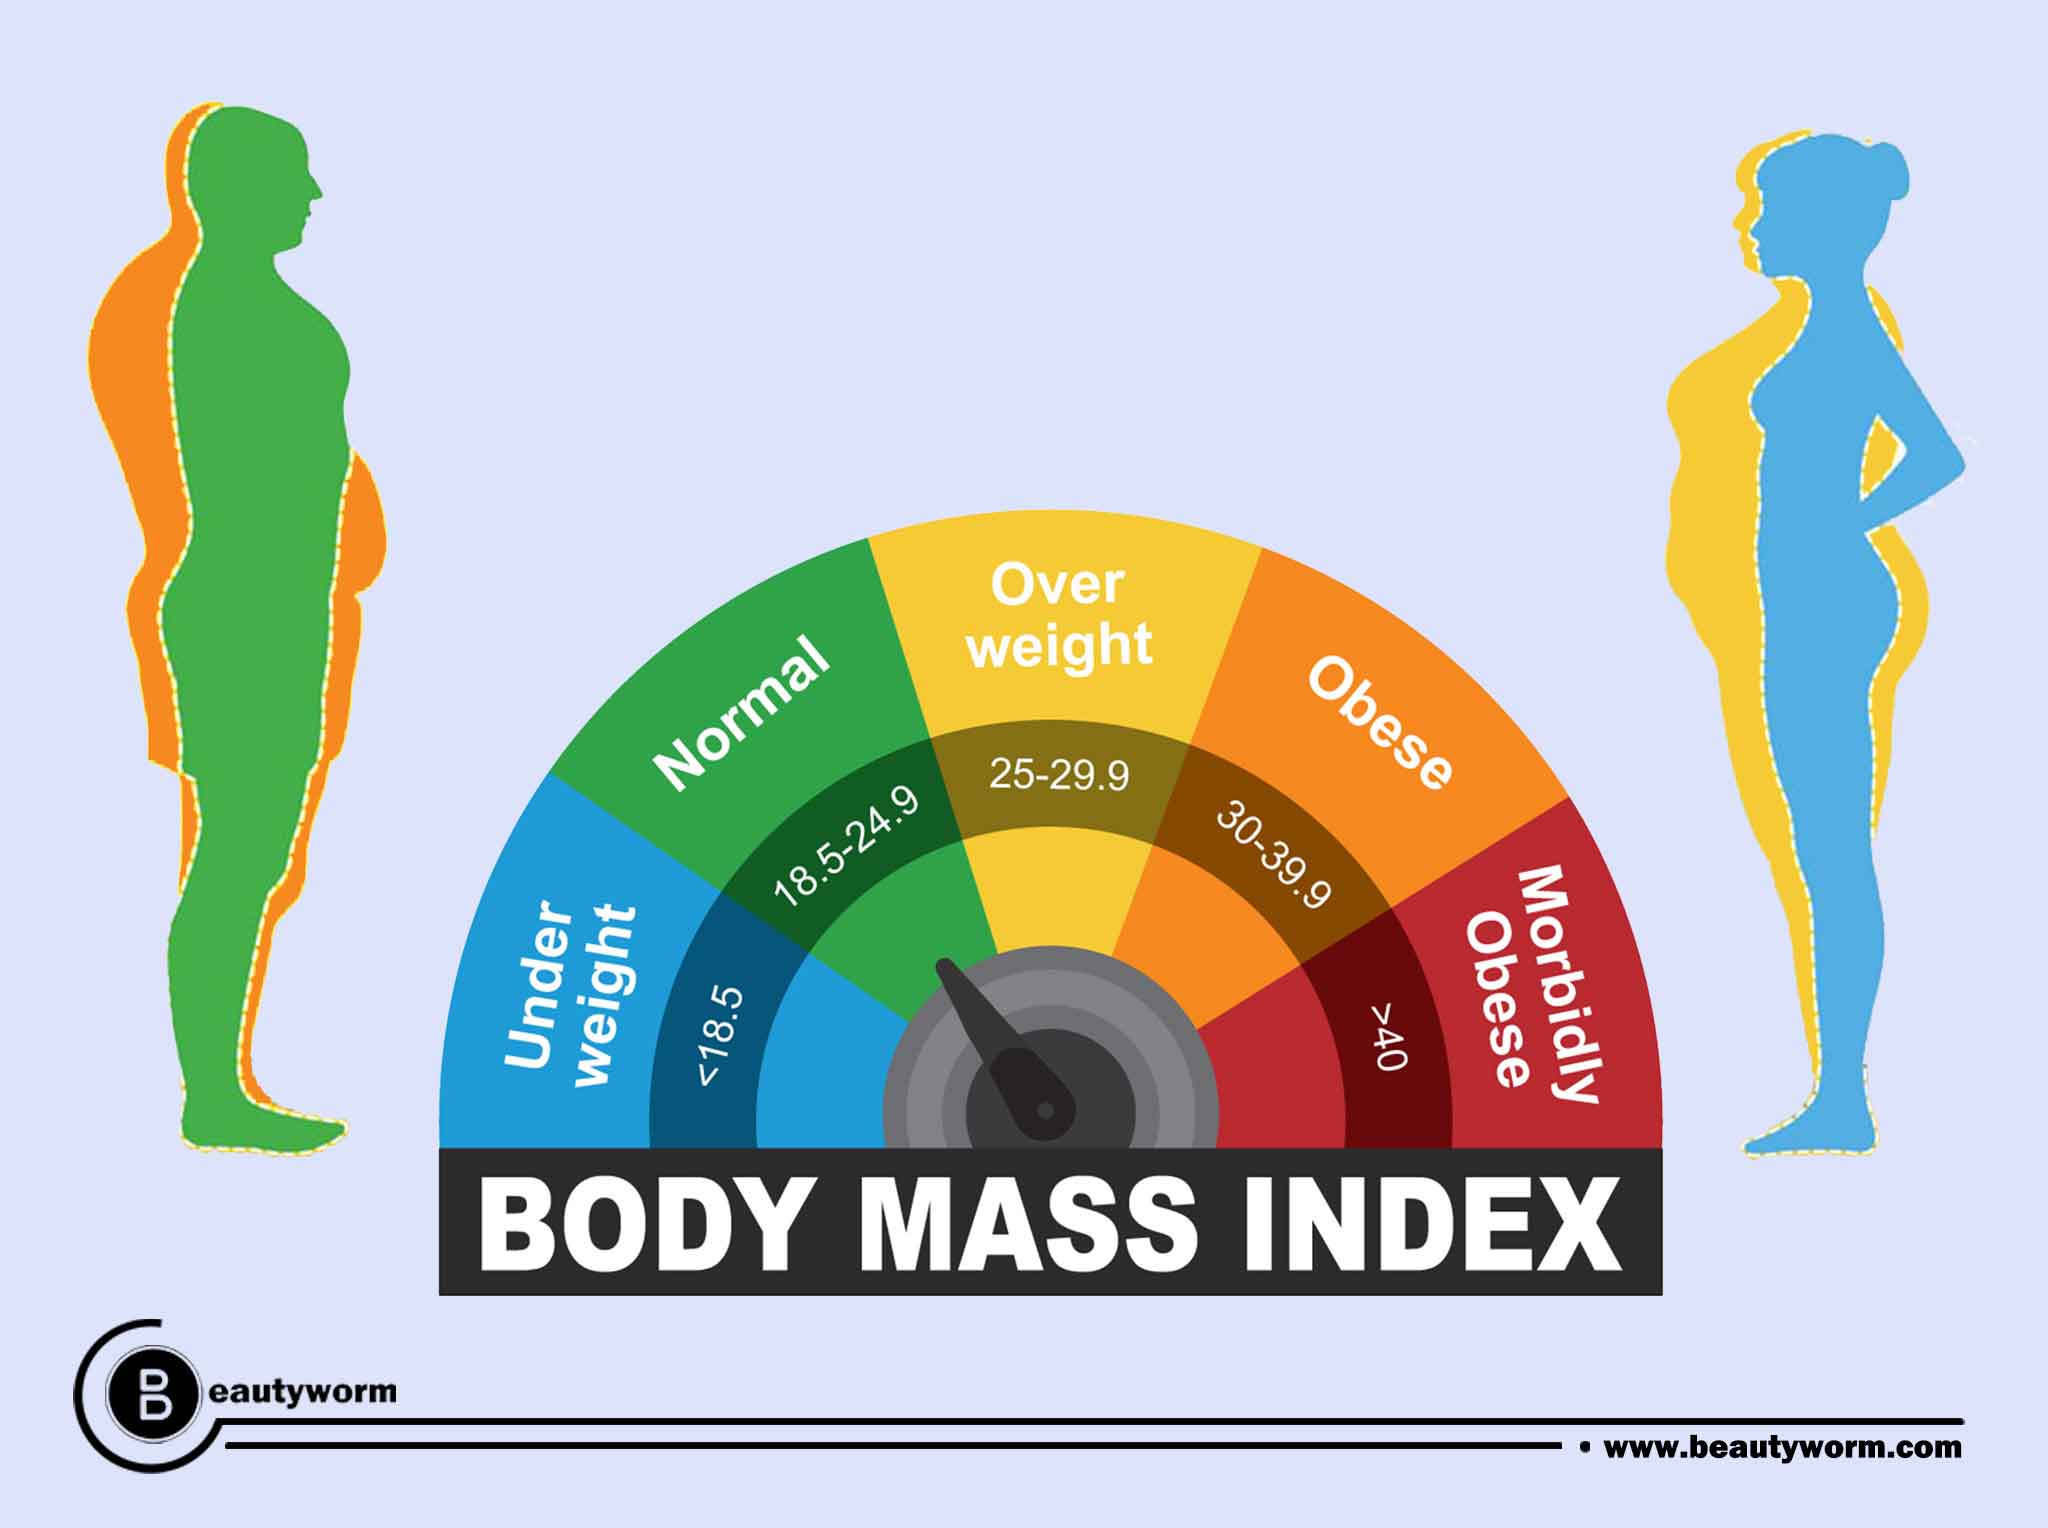 What are the BMI categories?